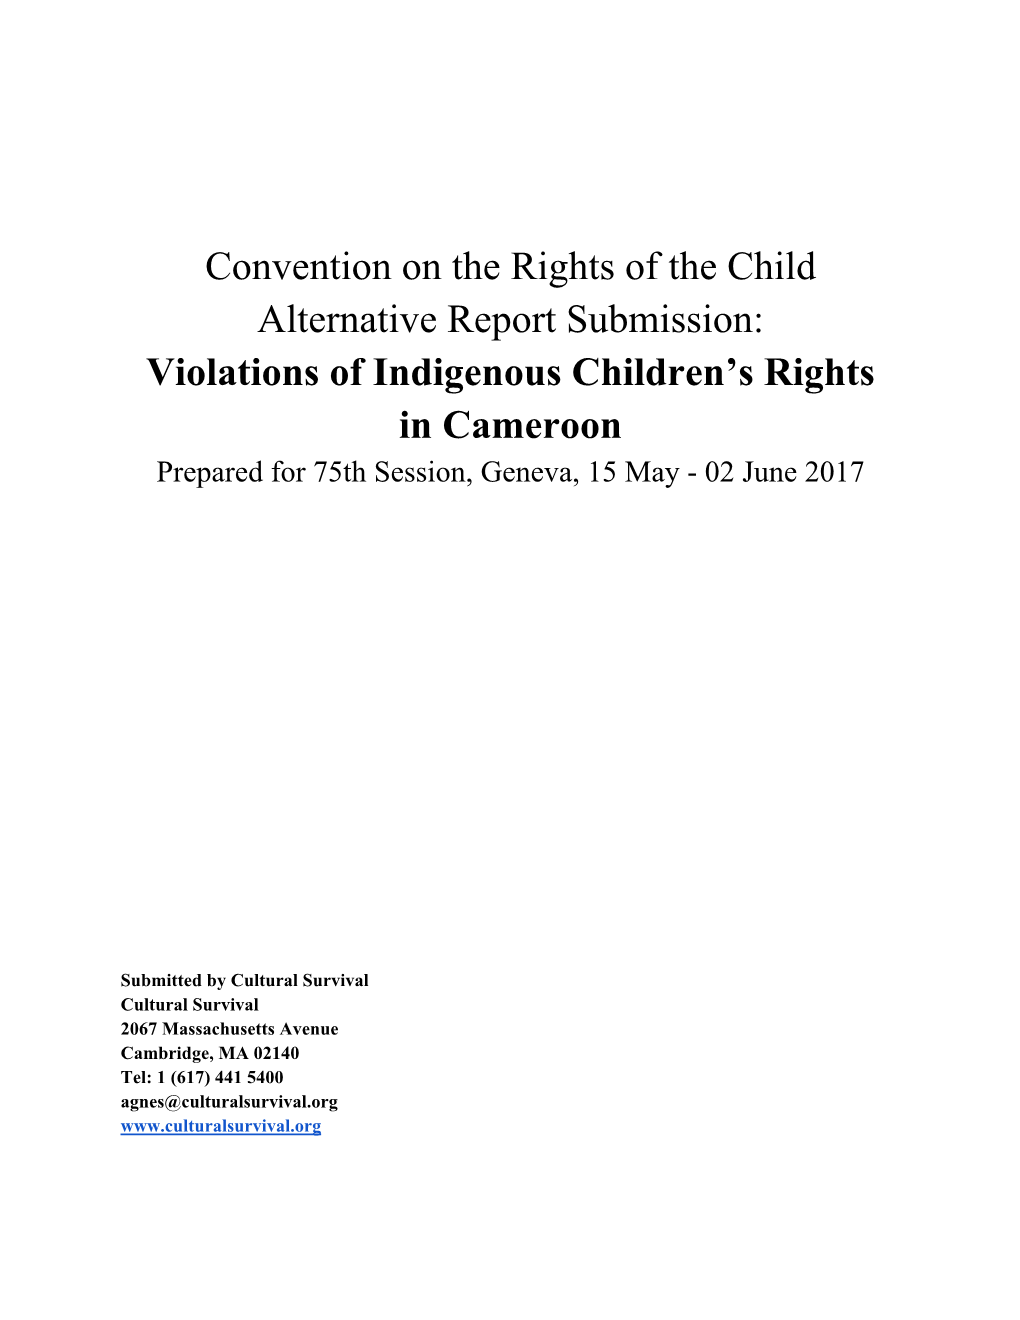 Violations of Indigenous Children's Rights in Cameroon